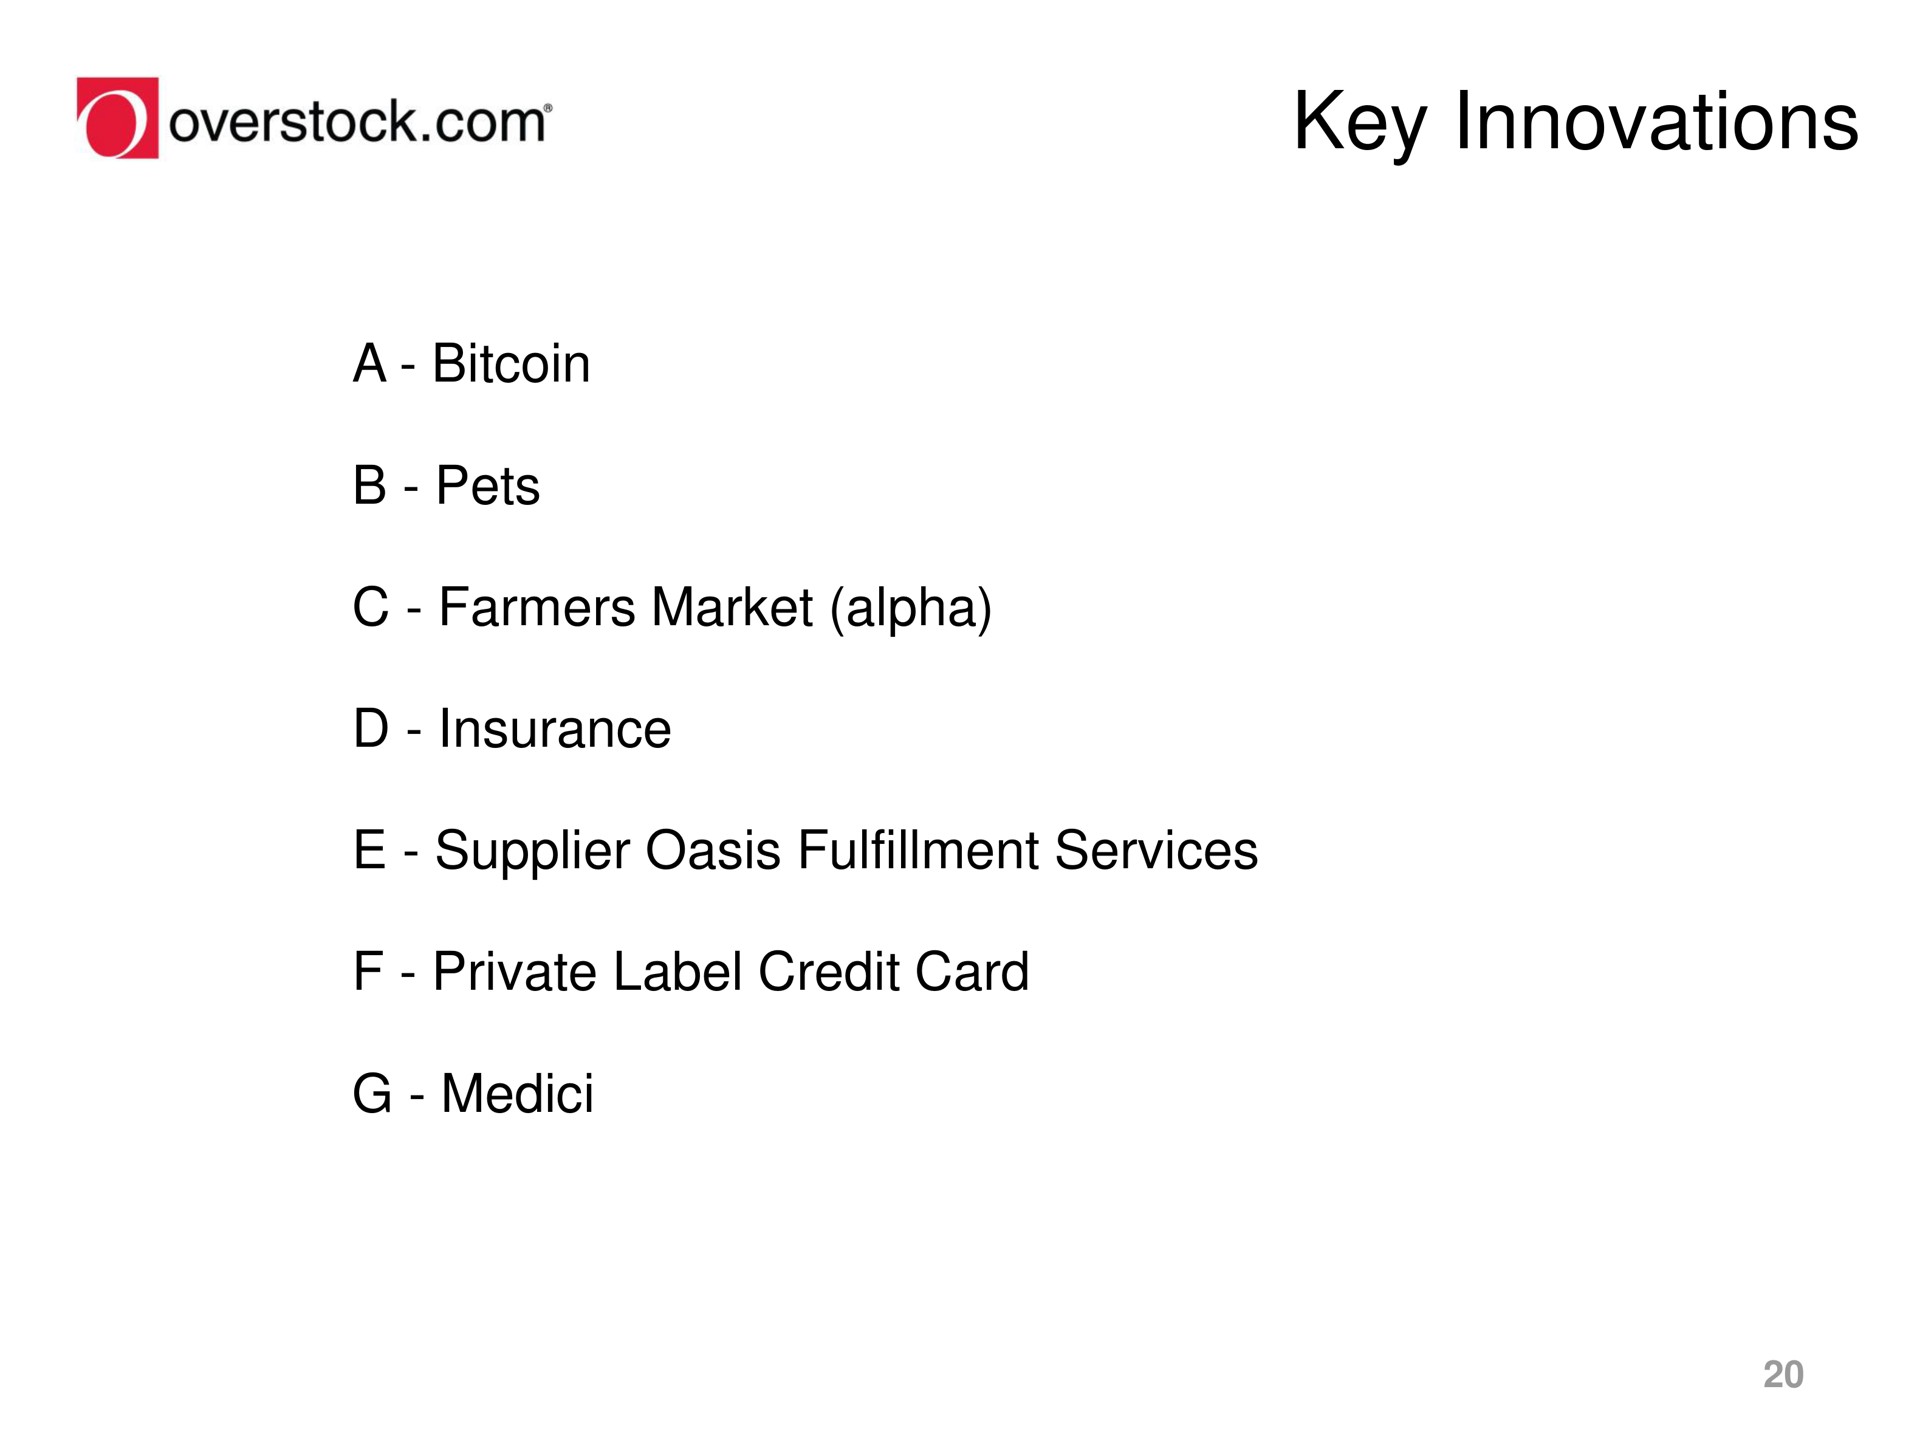 a pets farmers market alpha insurance supplier oasis fulfillment services private label credit card key innovations overstock | Overstock